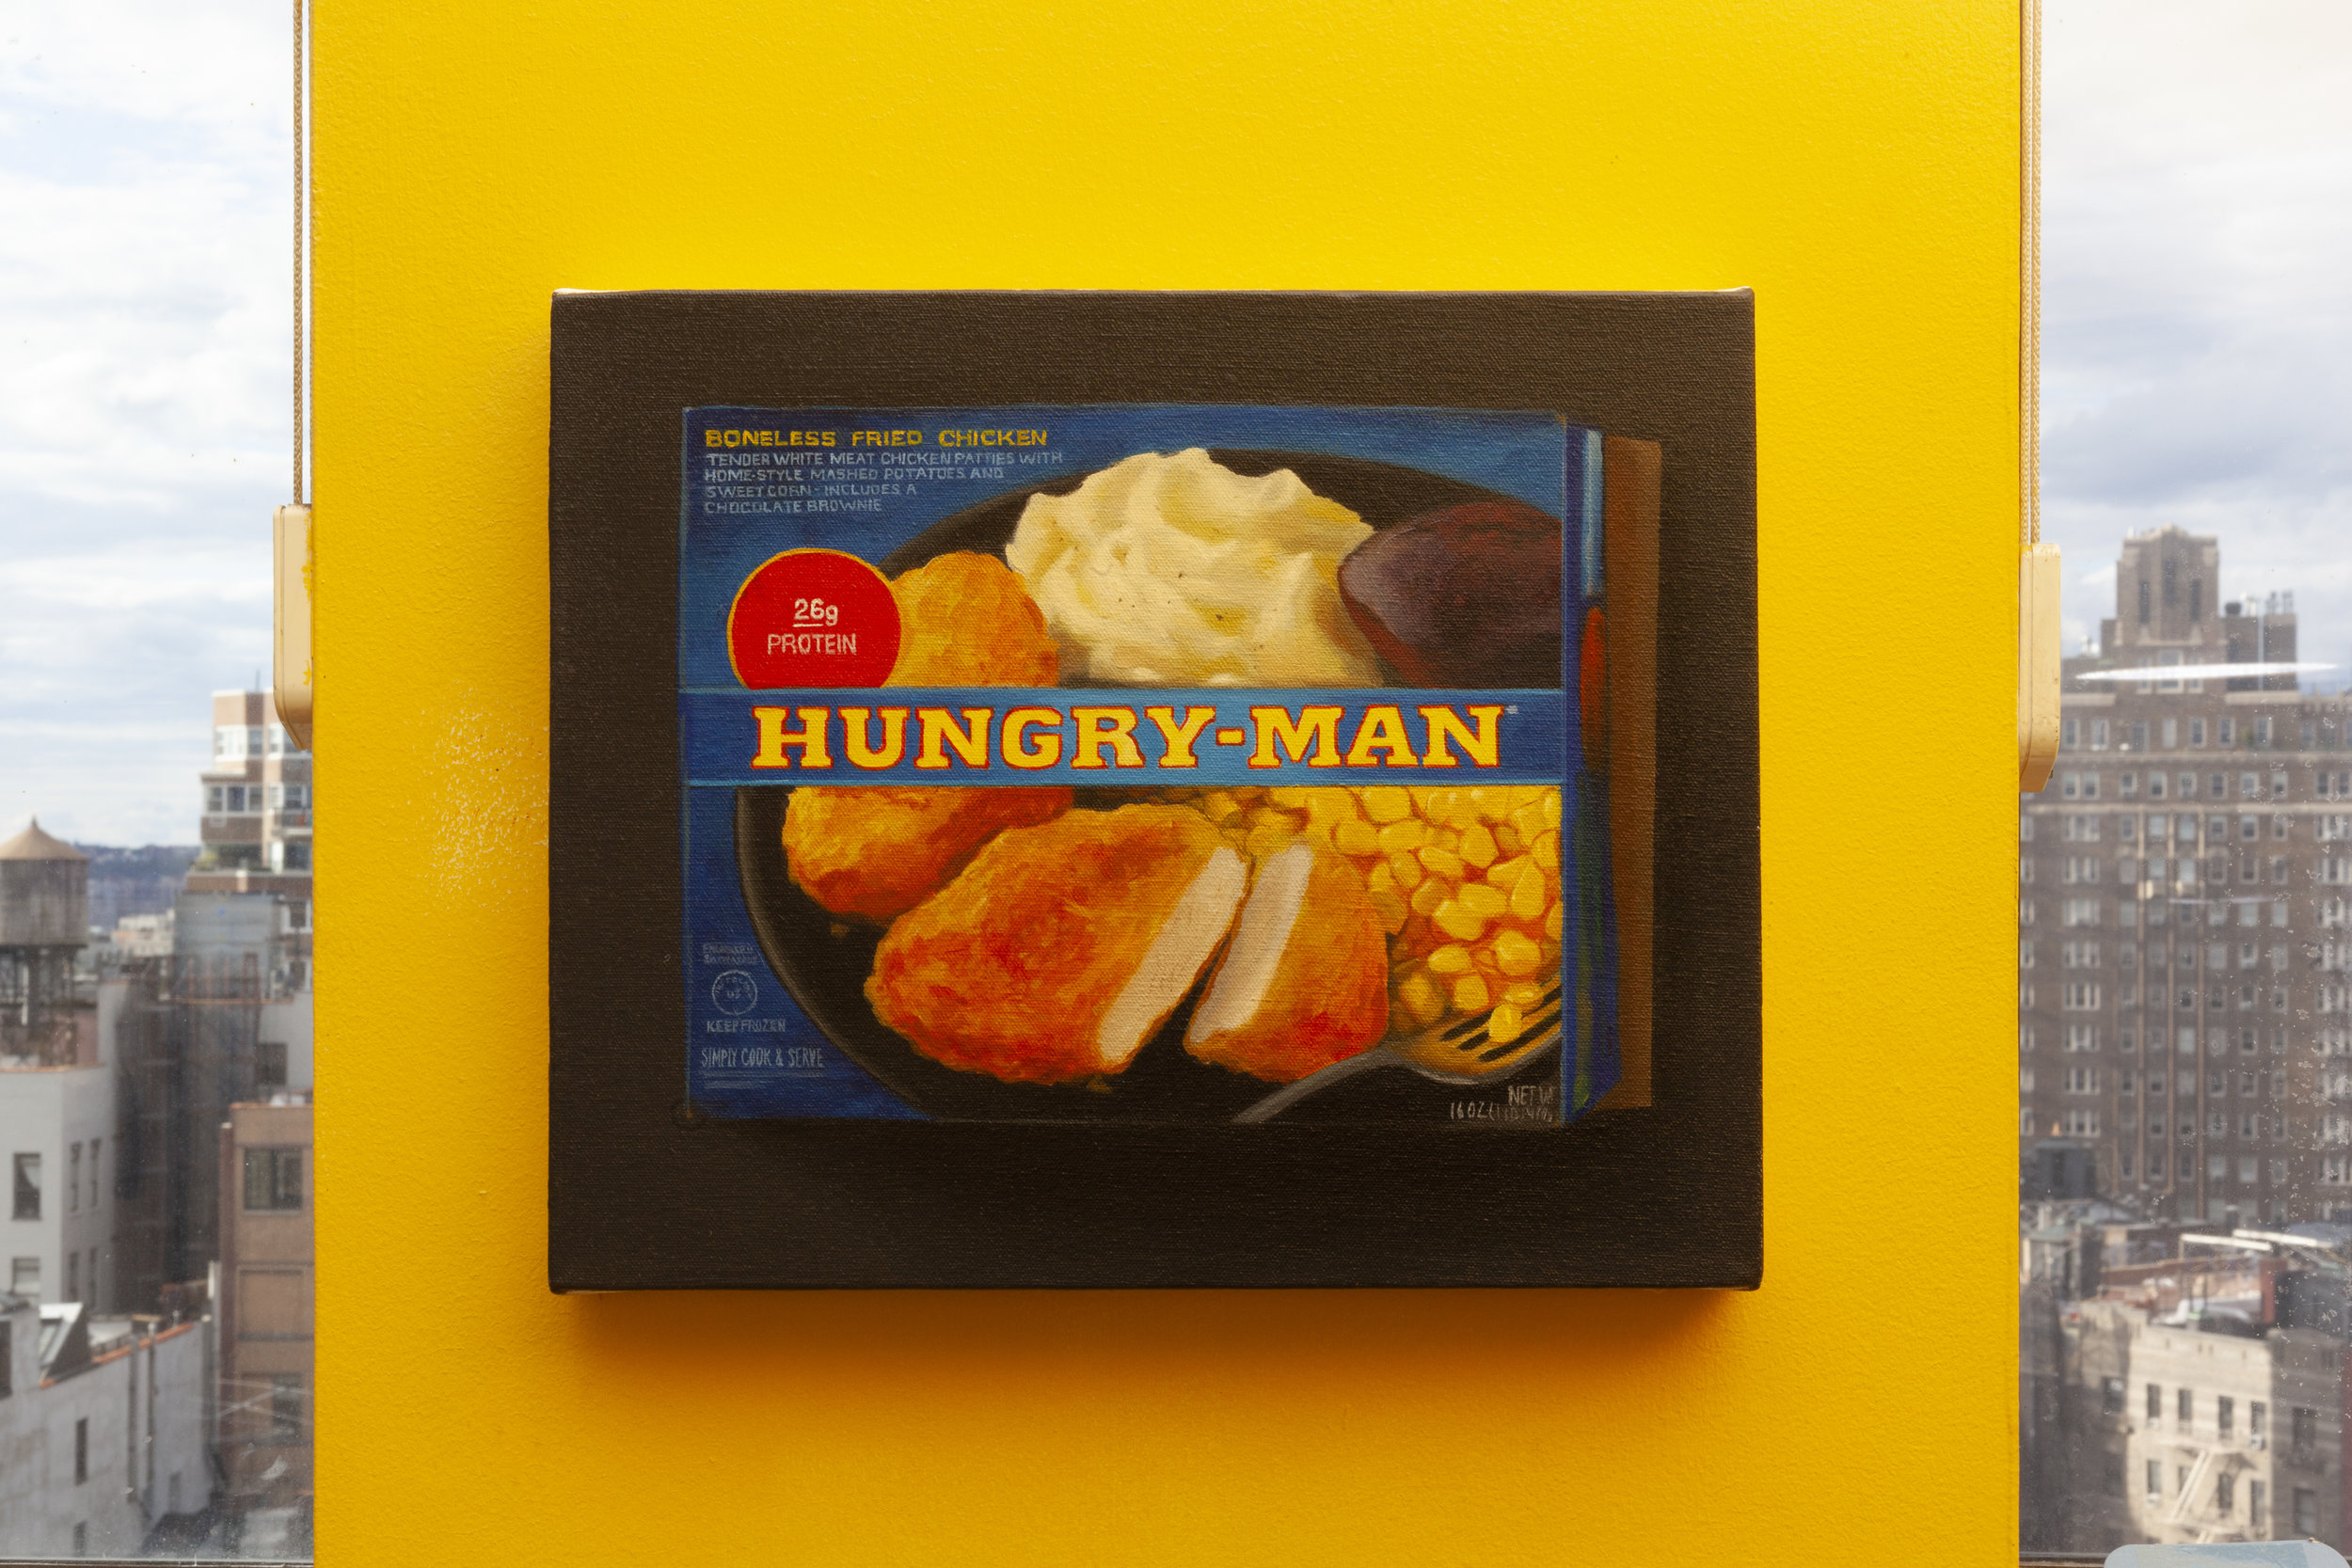  Brandi Twilley,  Hungry Man , 2018, Oil on canvas, 11.5 x 13.75 in 